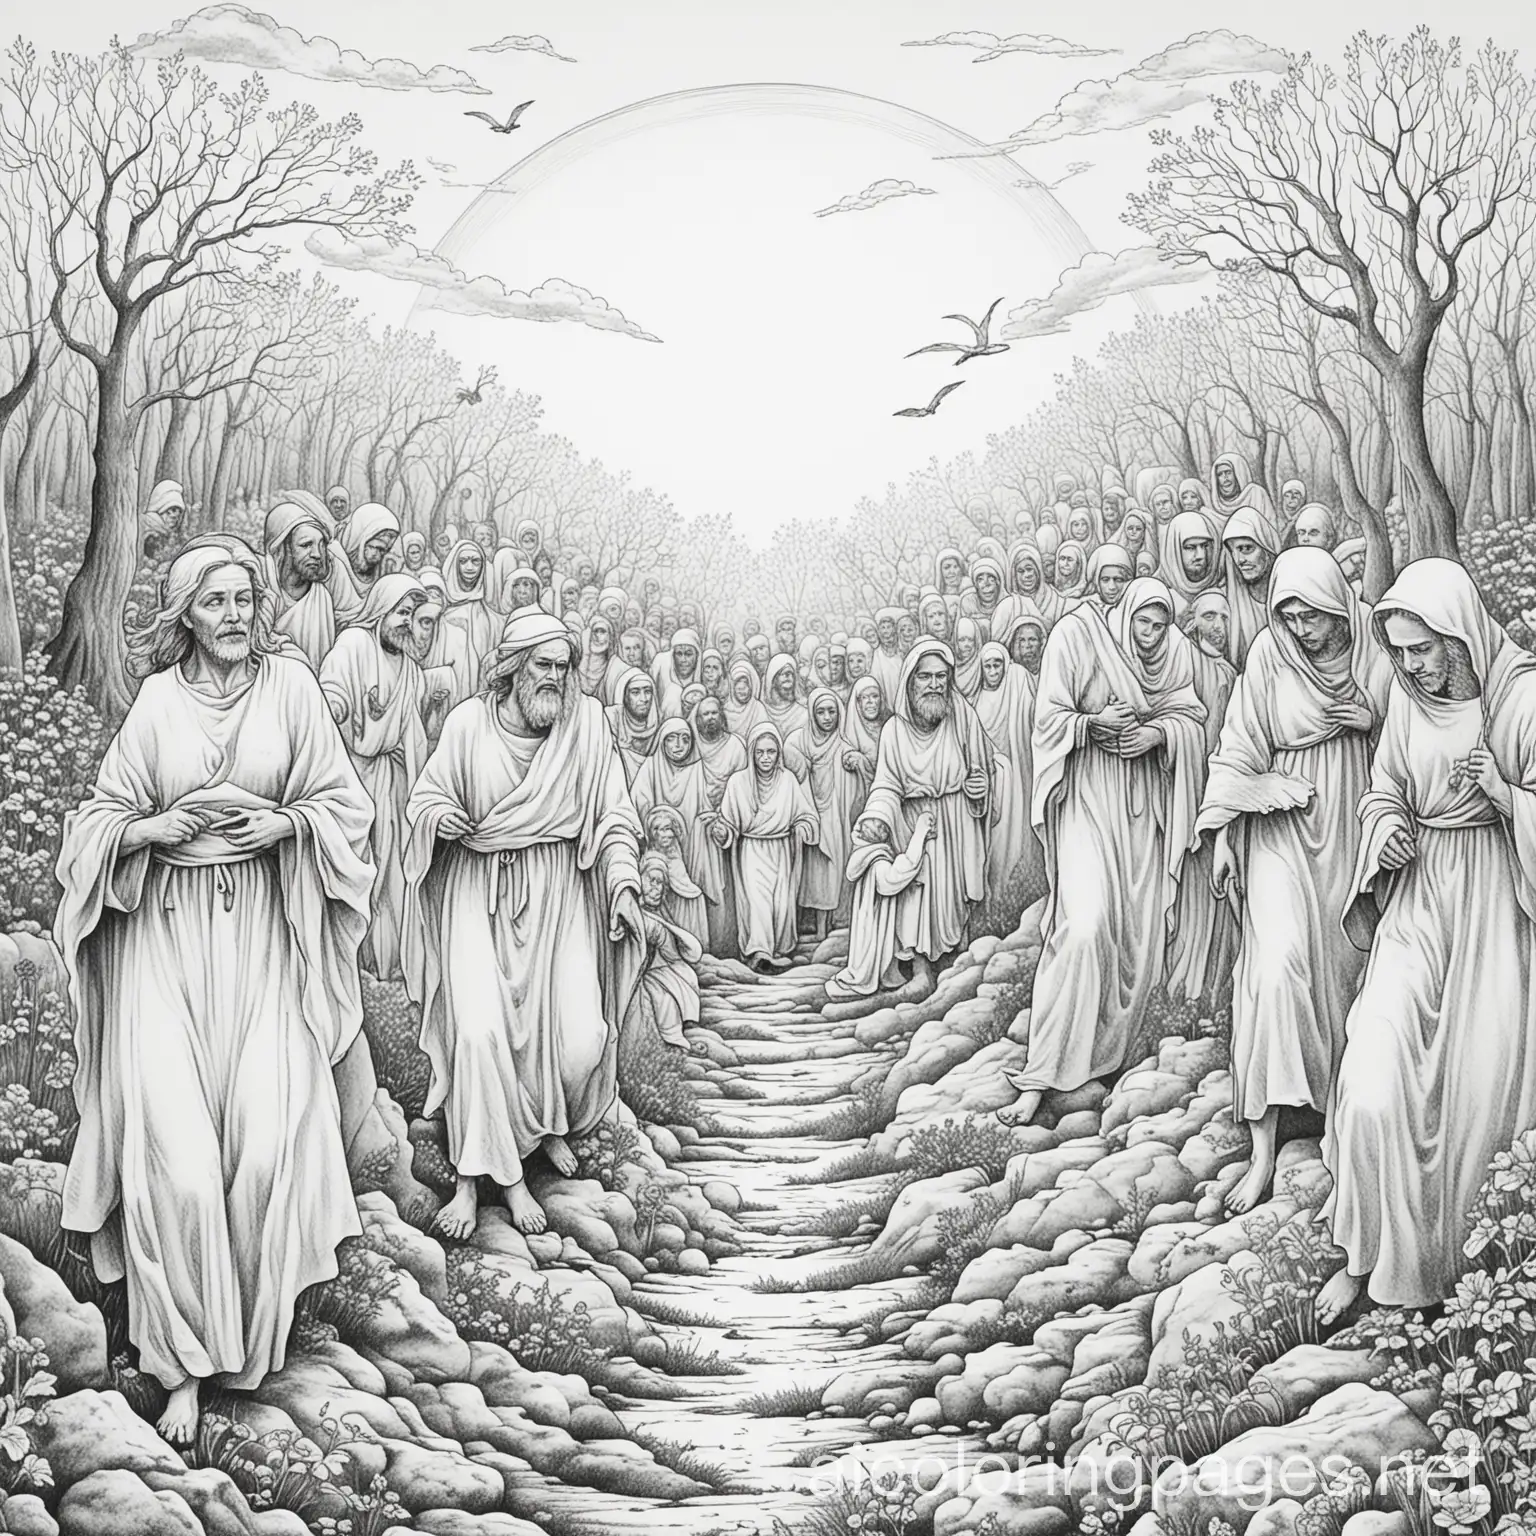 Souls coming out of their graves being brought back to life, Coloring Page, black and white, line art, white background, Simplicity, Ample White Space. The background of the coloring page is plain white to make it easy for young children to color within the lines. The outlines of all the subjects are easy to distinguish, making it simple for kids to color without too much difficulty